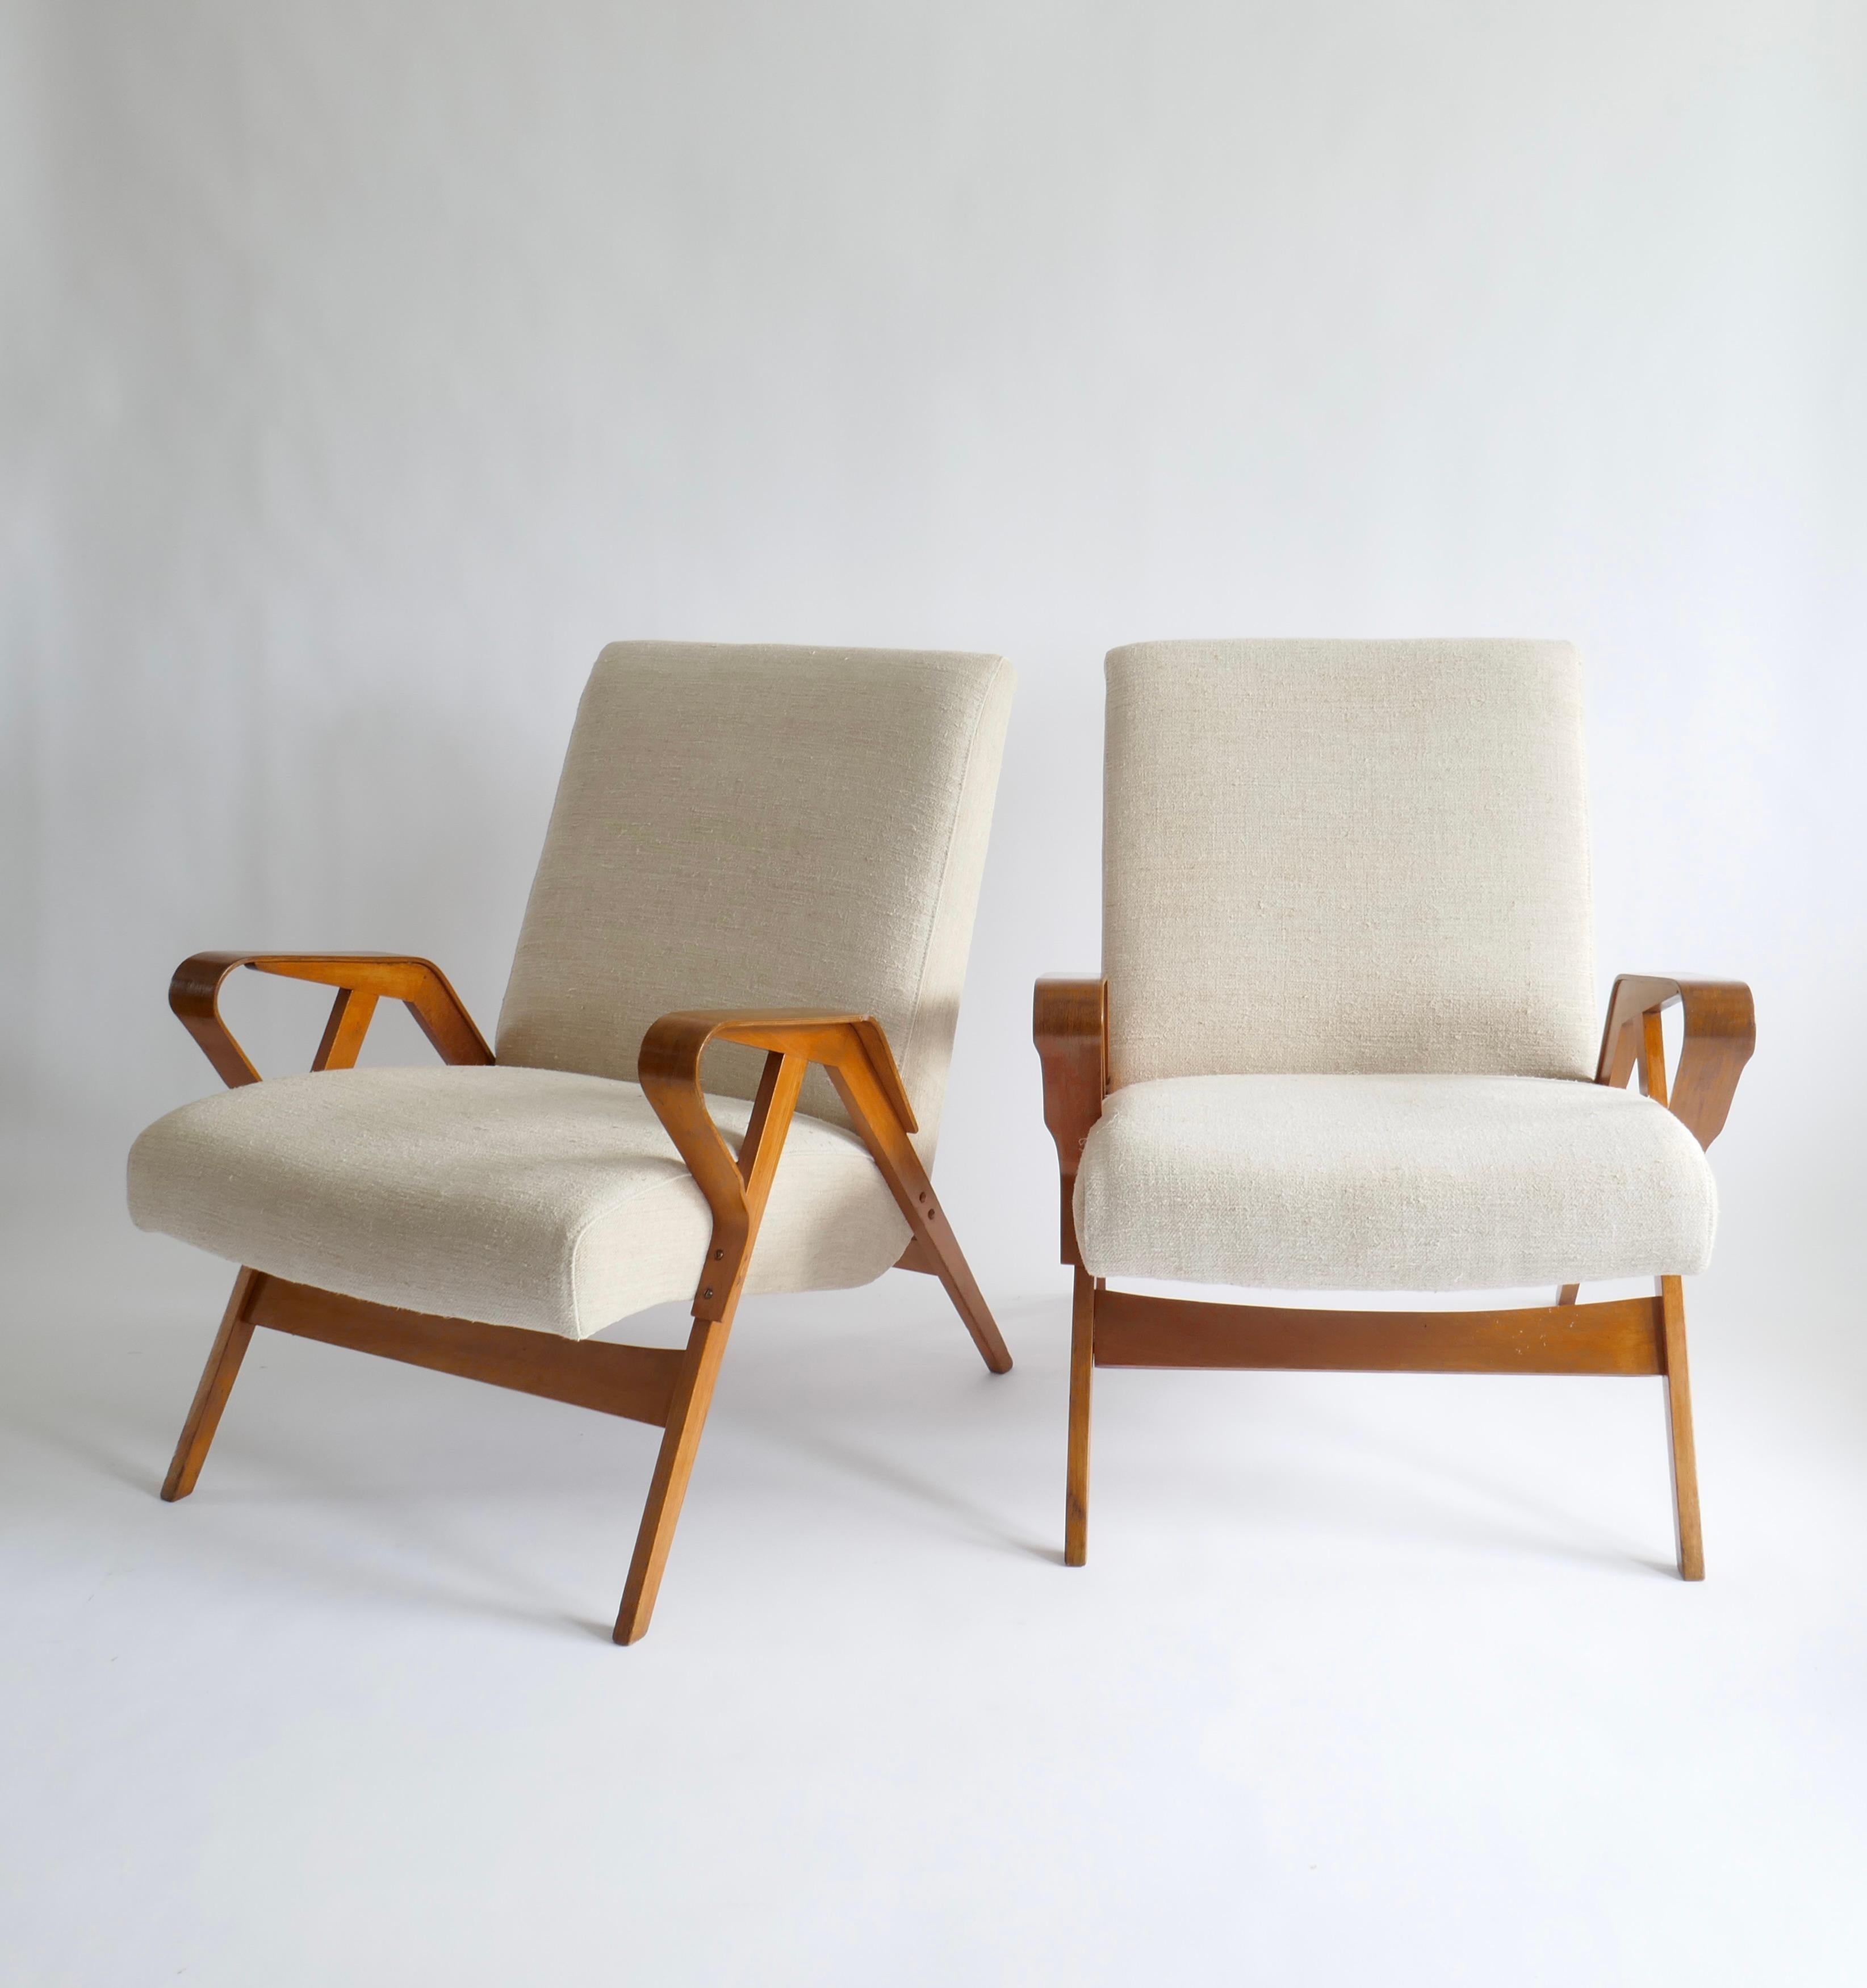 A beautiful pair of Mid-Century Modern armchairs. Sculptural wood frame hosts a comfortable seating with slightly inclined back rest and a deep seat.
Upholstered in a beautiful vintage off white linen they are perfect in any type of room decor 
In